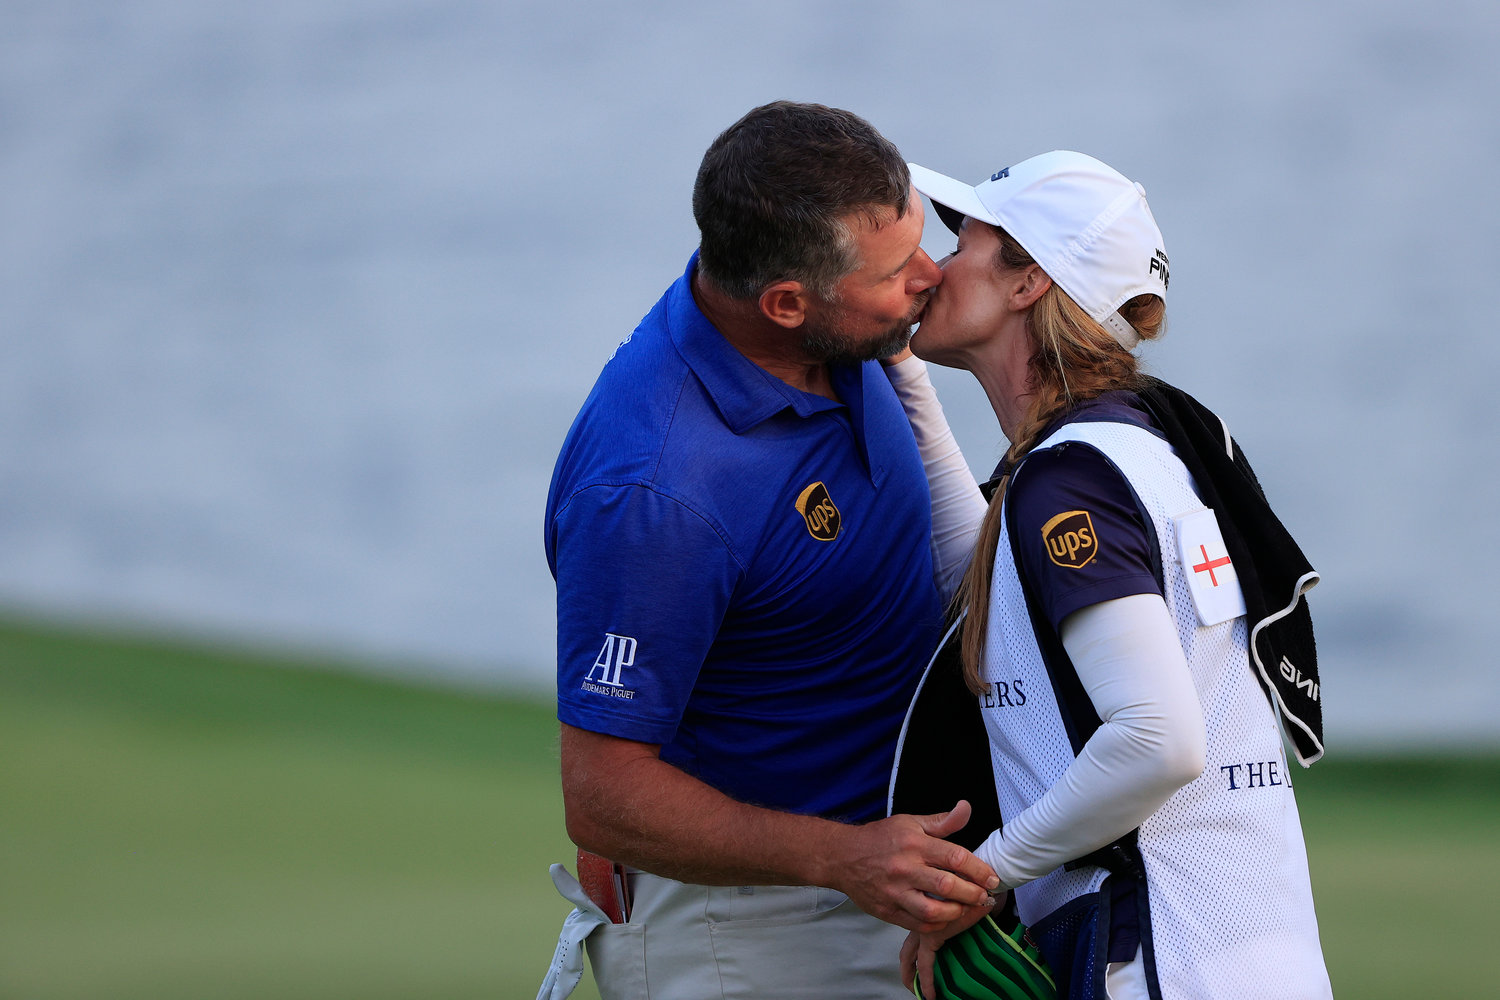 PONTE VEDRA BEACH, FLORIDA - MARCH 13: Lee Westwood of England kisses his caddie and partner Helen Storey after finishing on the 18th green during the third round of THE PLAYERS Championship on THE PLAYERS Stadium Course at TPC Sawgrass on March 13, 2021 in Ponte Vedra Beach, Florida. (Photo by Sam Greenwood/Getty Images)